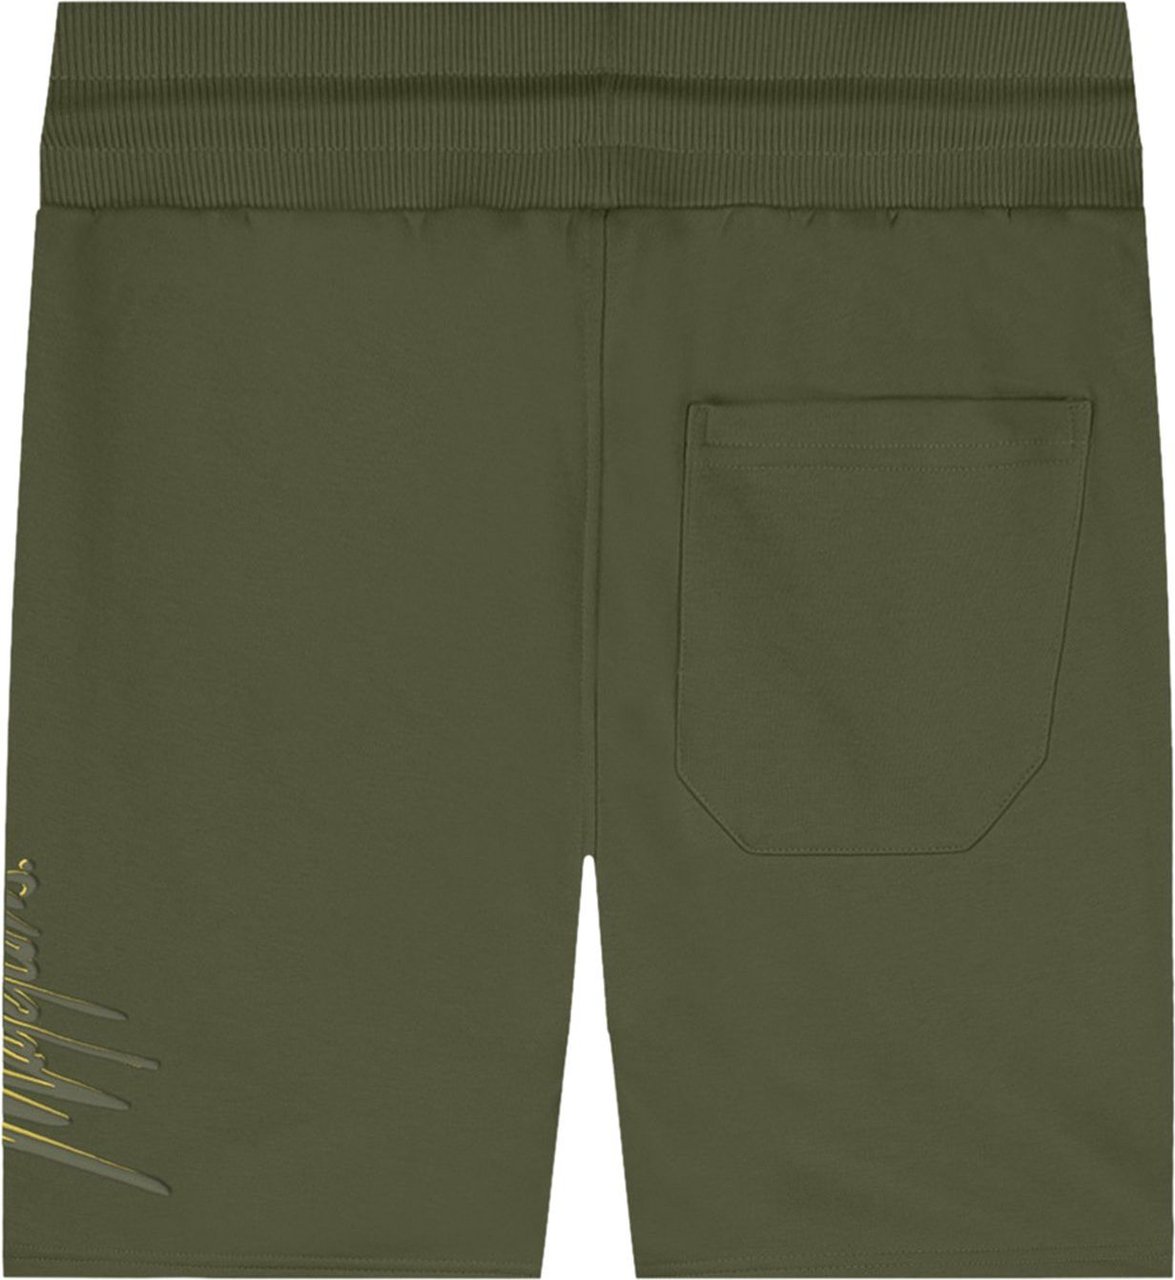 Malelions Duo Essentials Short - Army/Yellow Groen